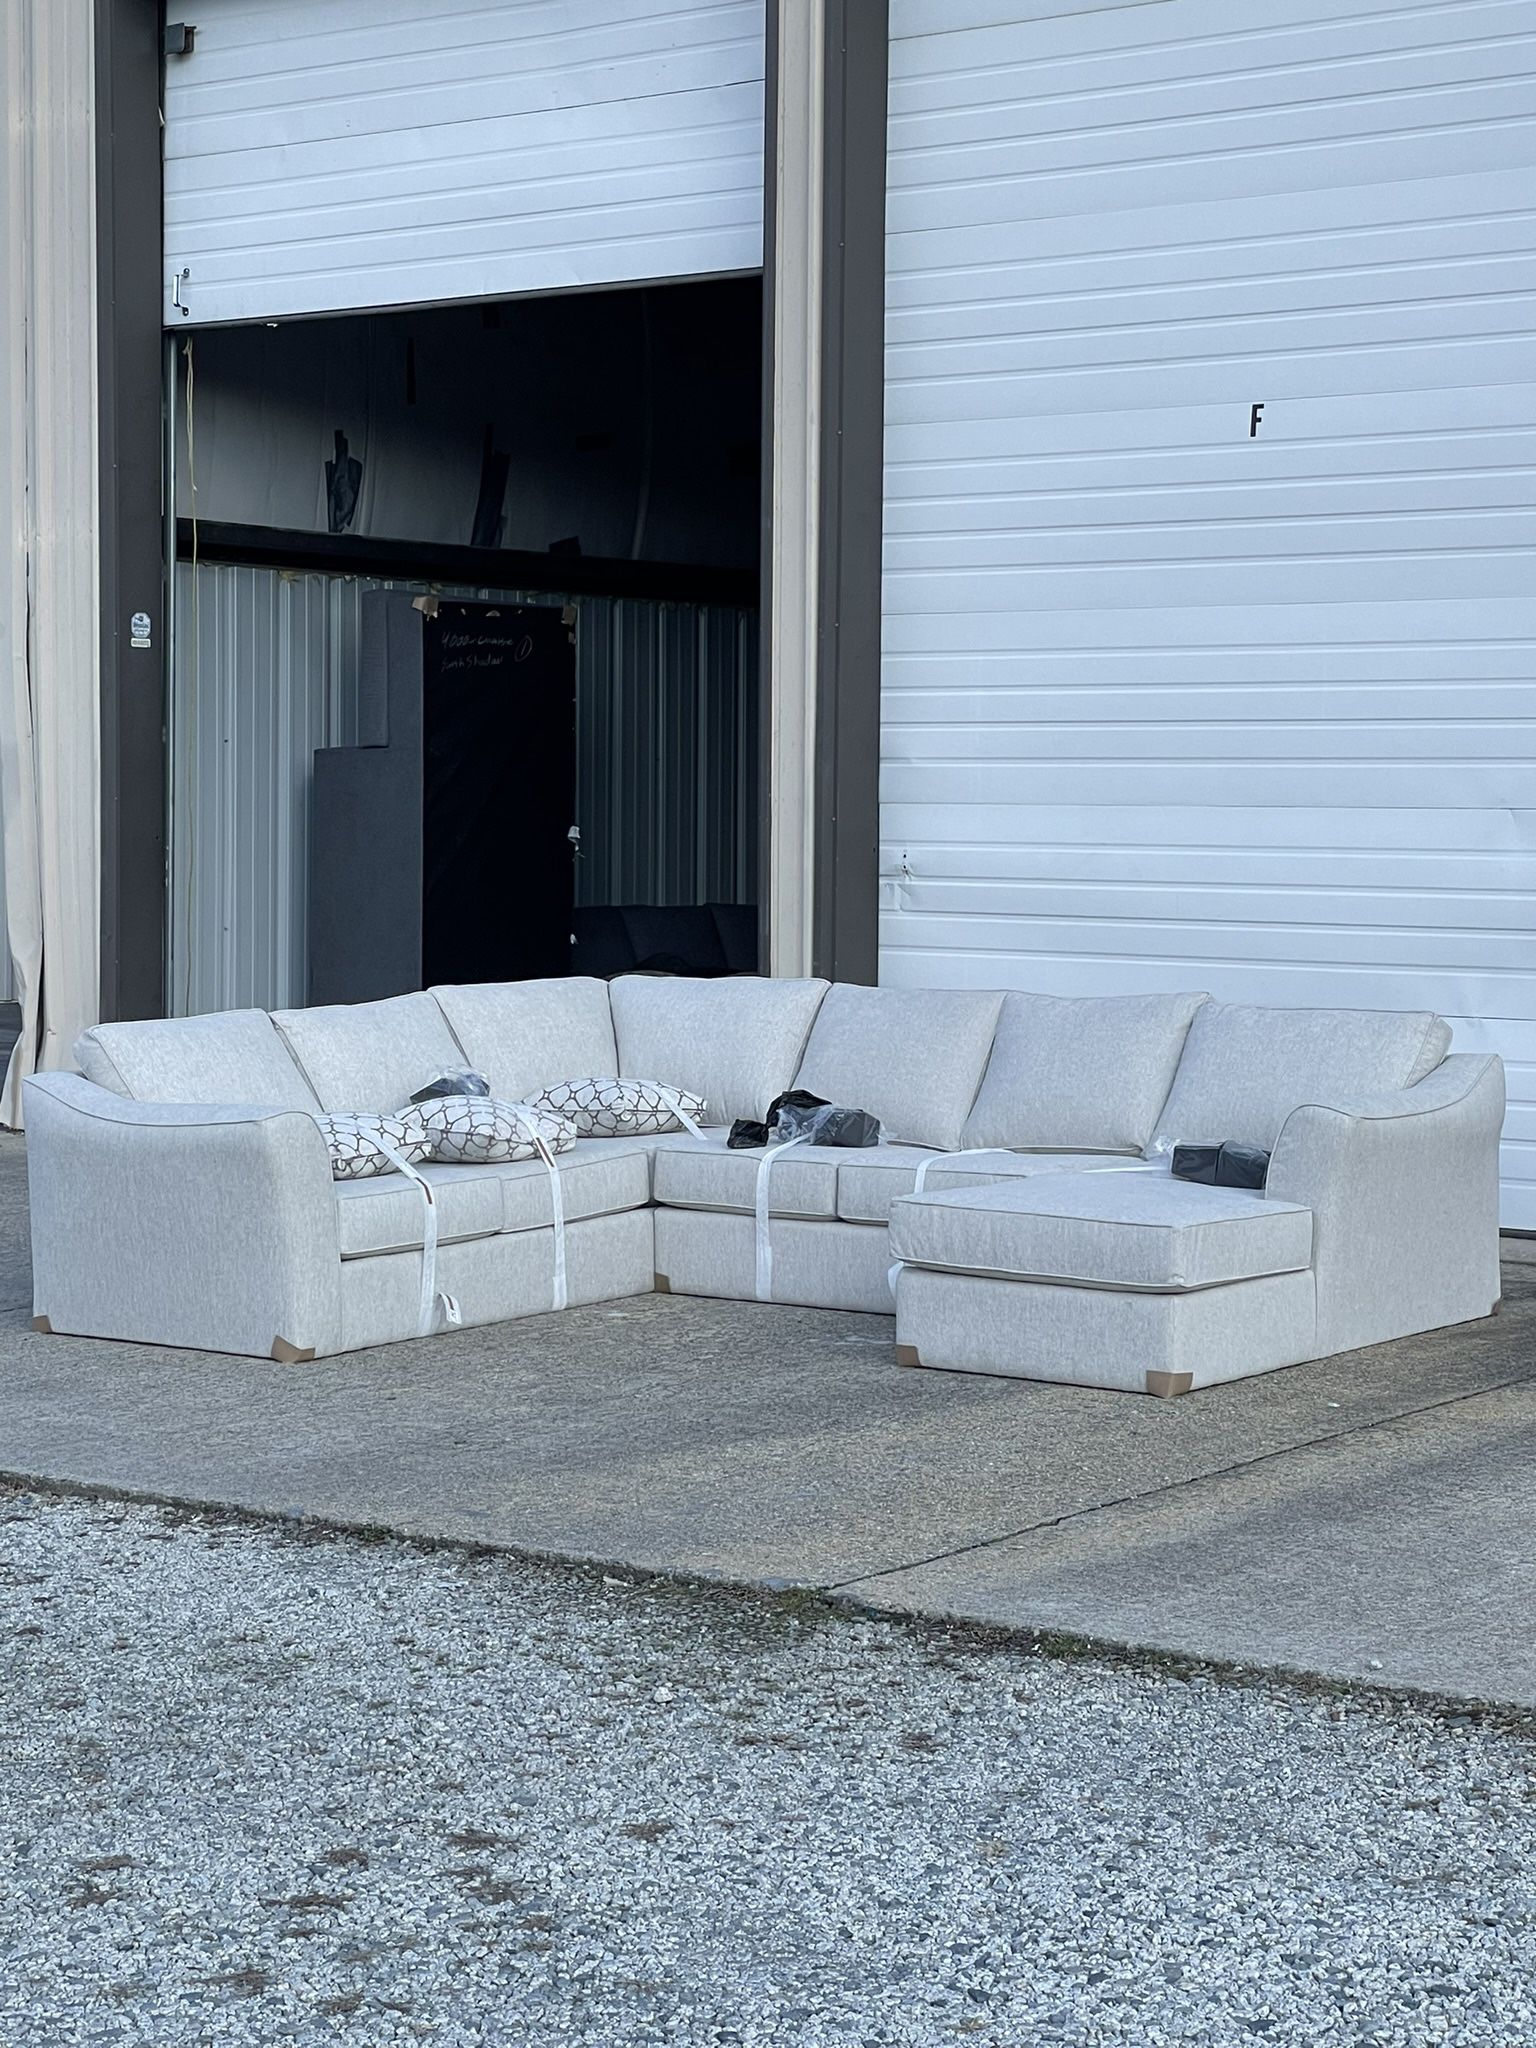 U-Shaped Sectional - Delivery and Financing (Price $995)